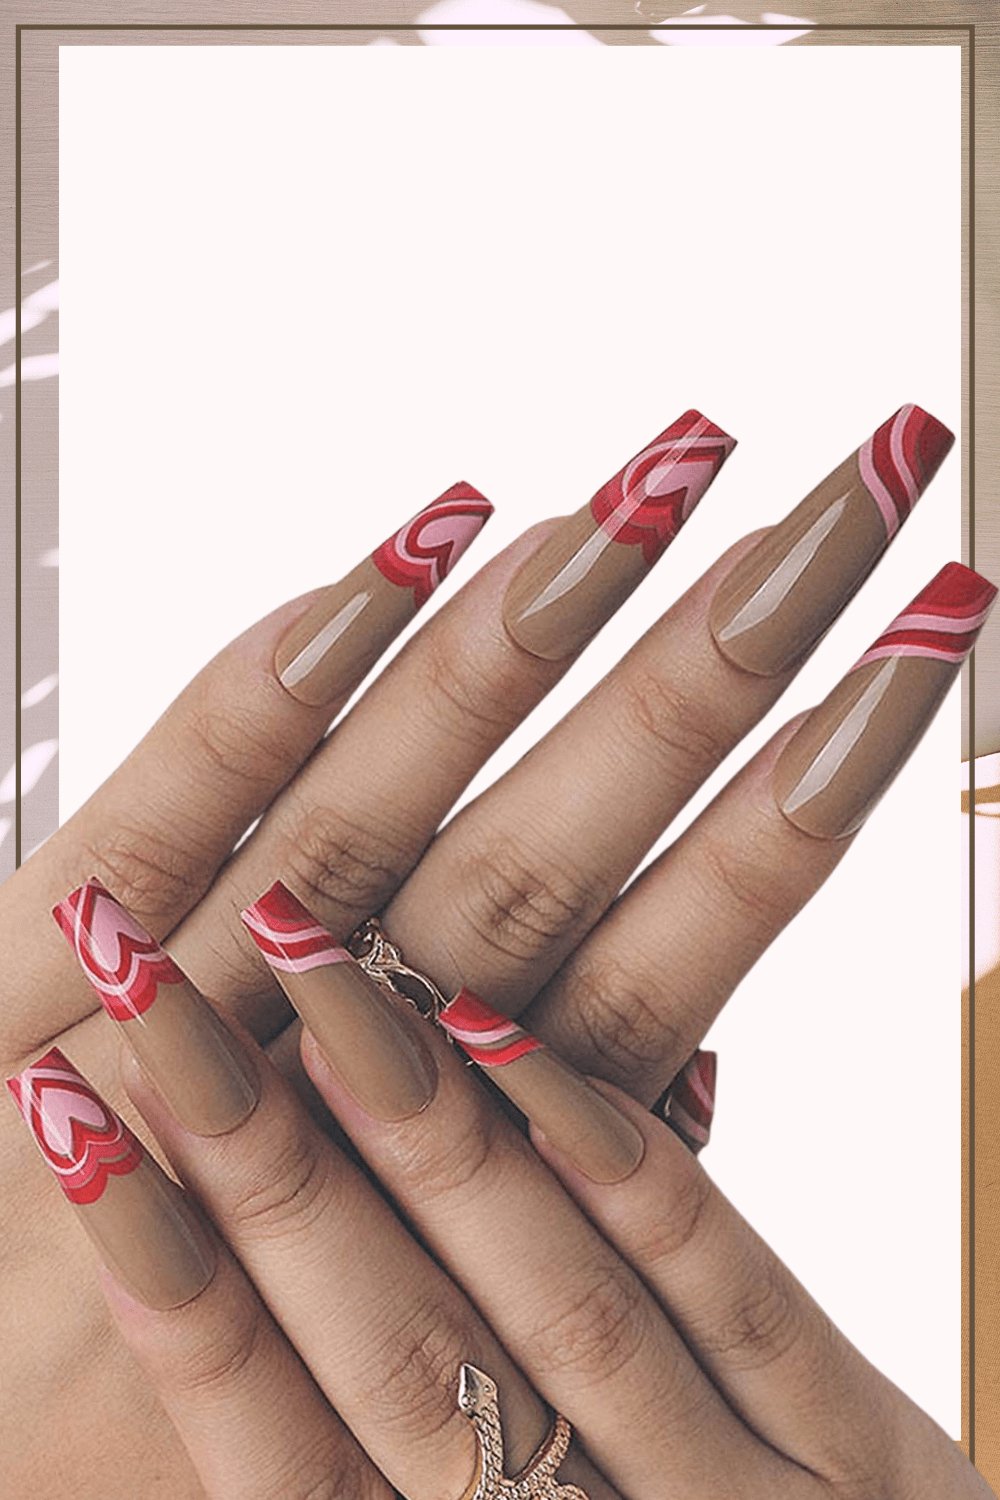 Red Heart French Tip Coffin Wave Swirl Press On Nails Kit - TGC Boutique - Press On Nails